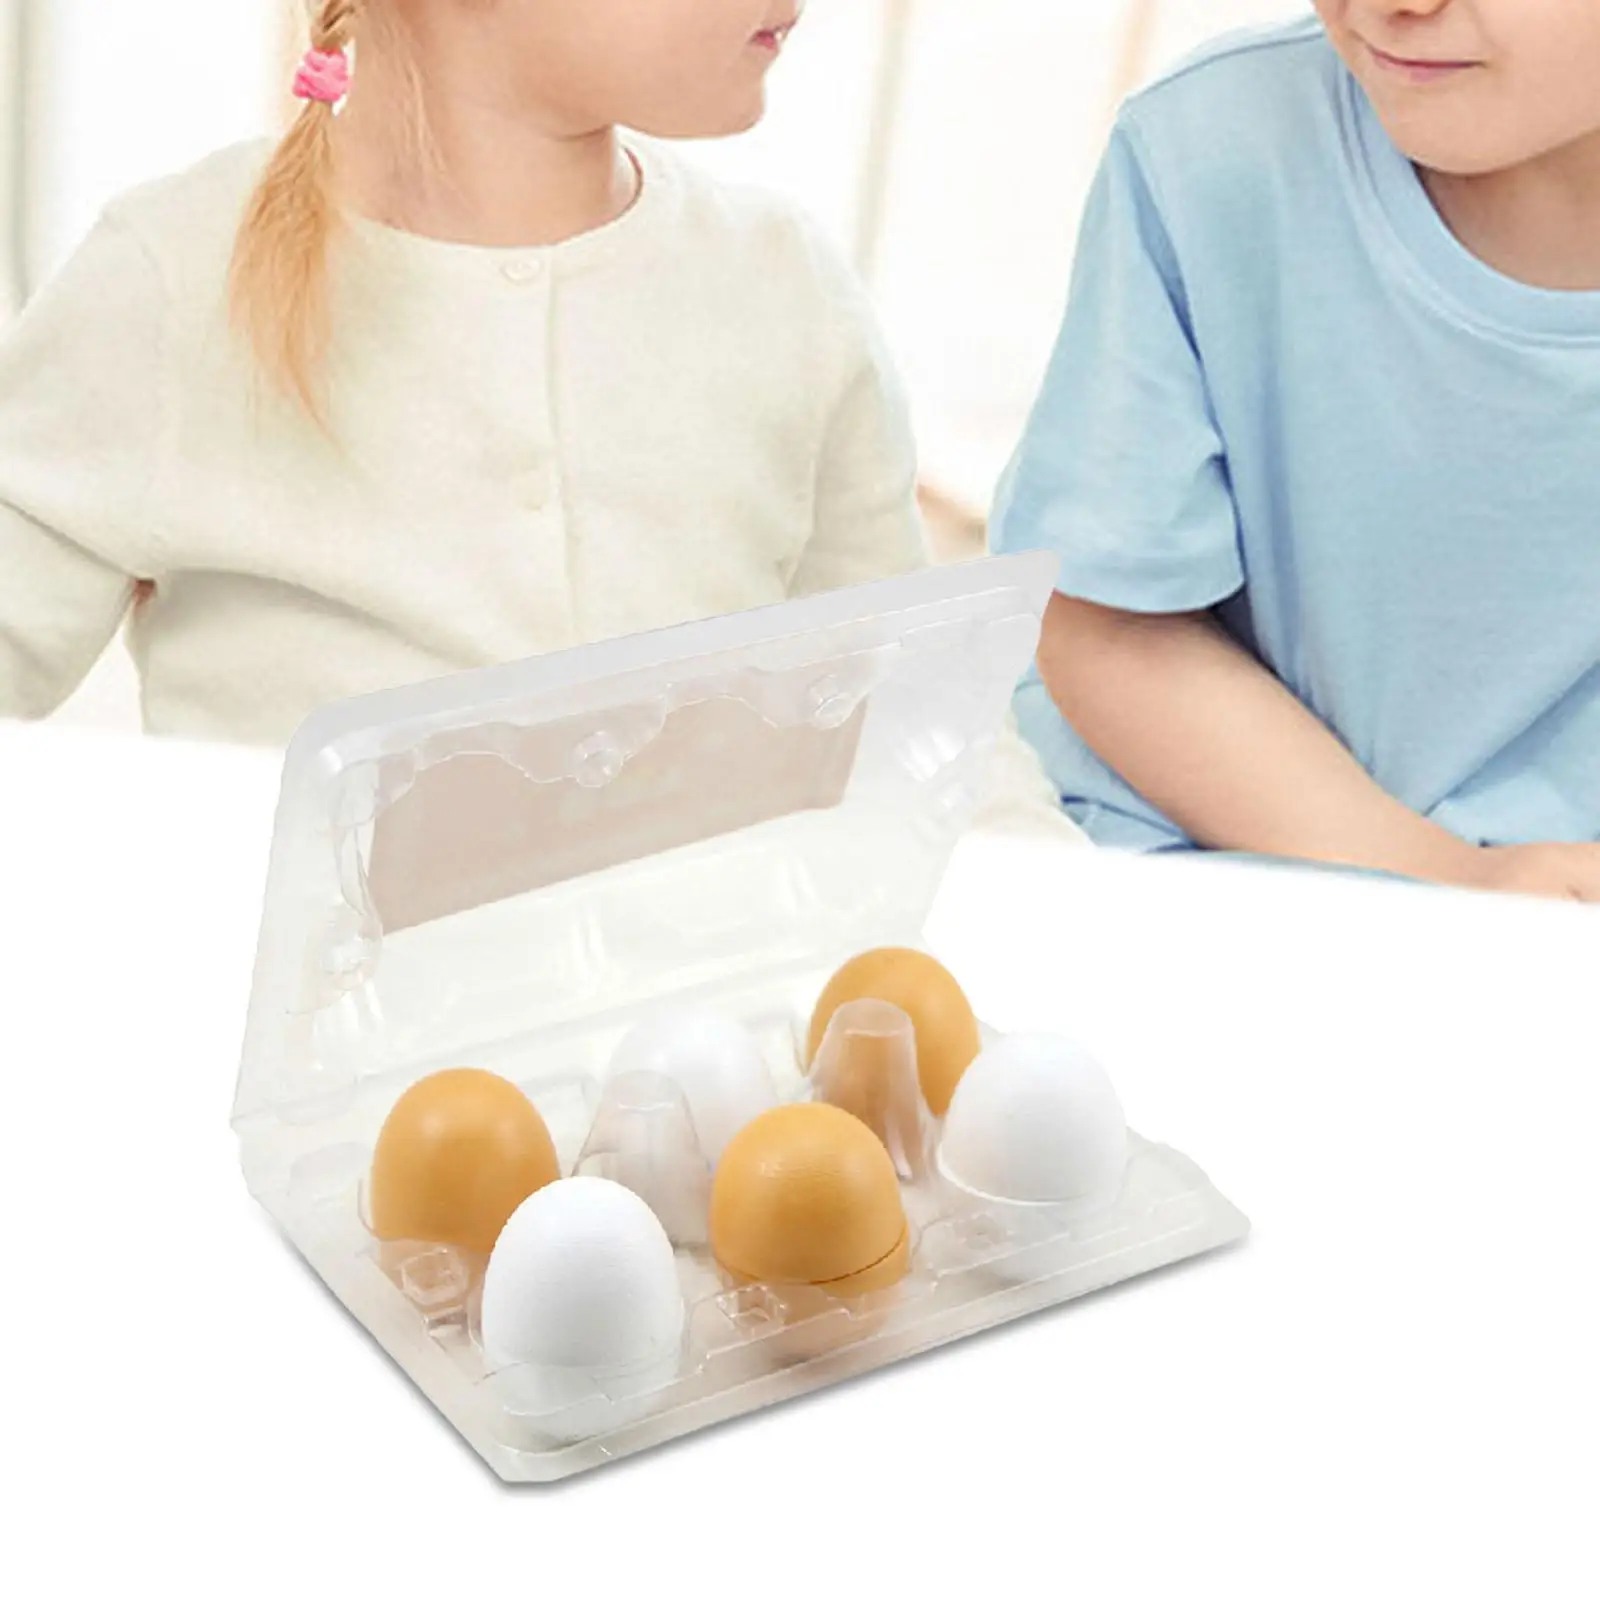 Simulation Wooden Eggs Toys Kitchen Pretend Toys Photo Props Crafts Educational Toy for Game Household School Kithcen Boy